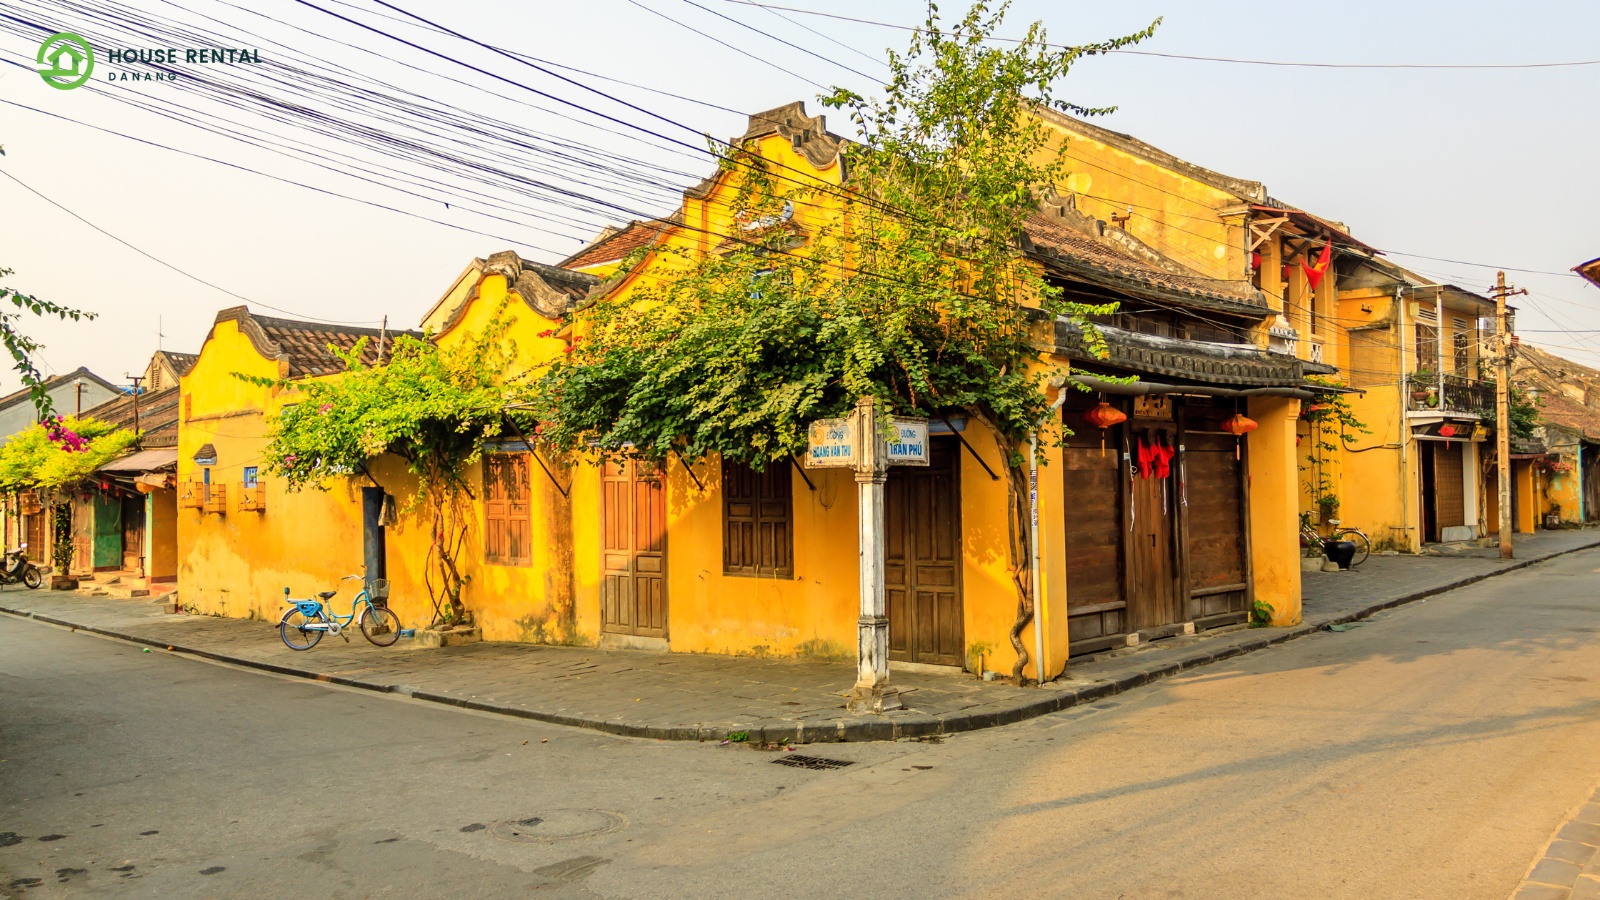 5 Best Ways to Travel from Da Nang to Hoi An by Bus, Taxi, and More